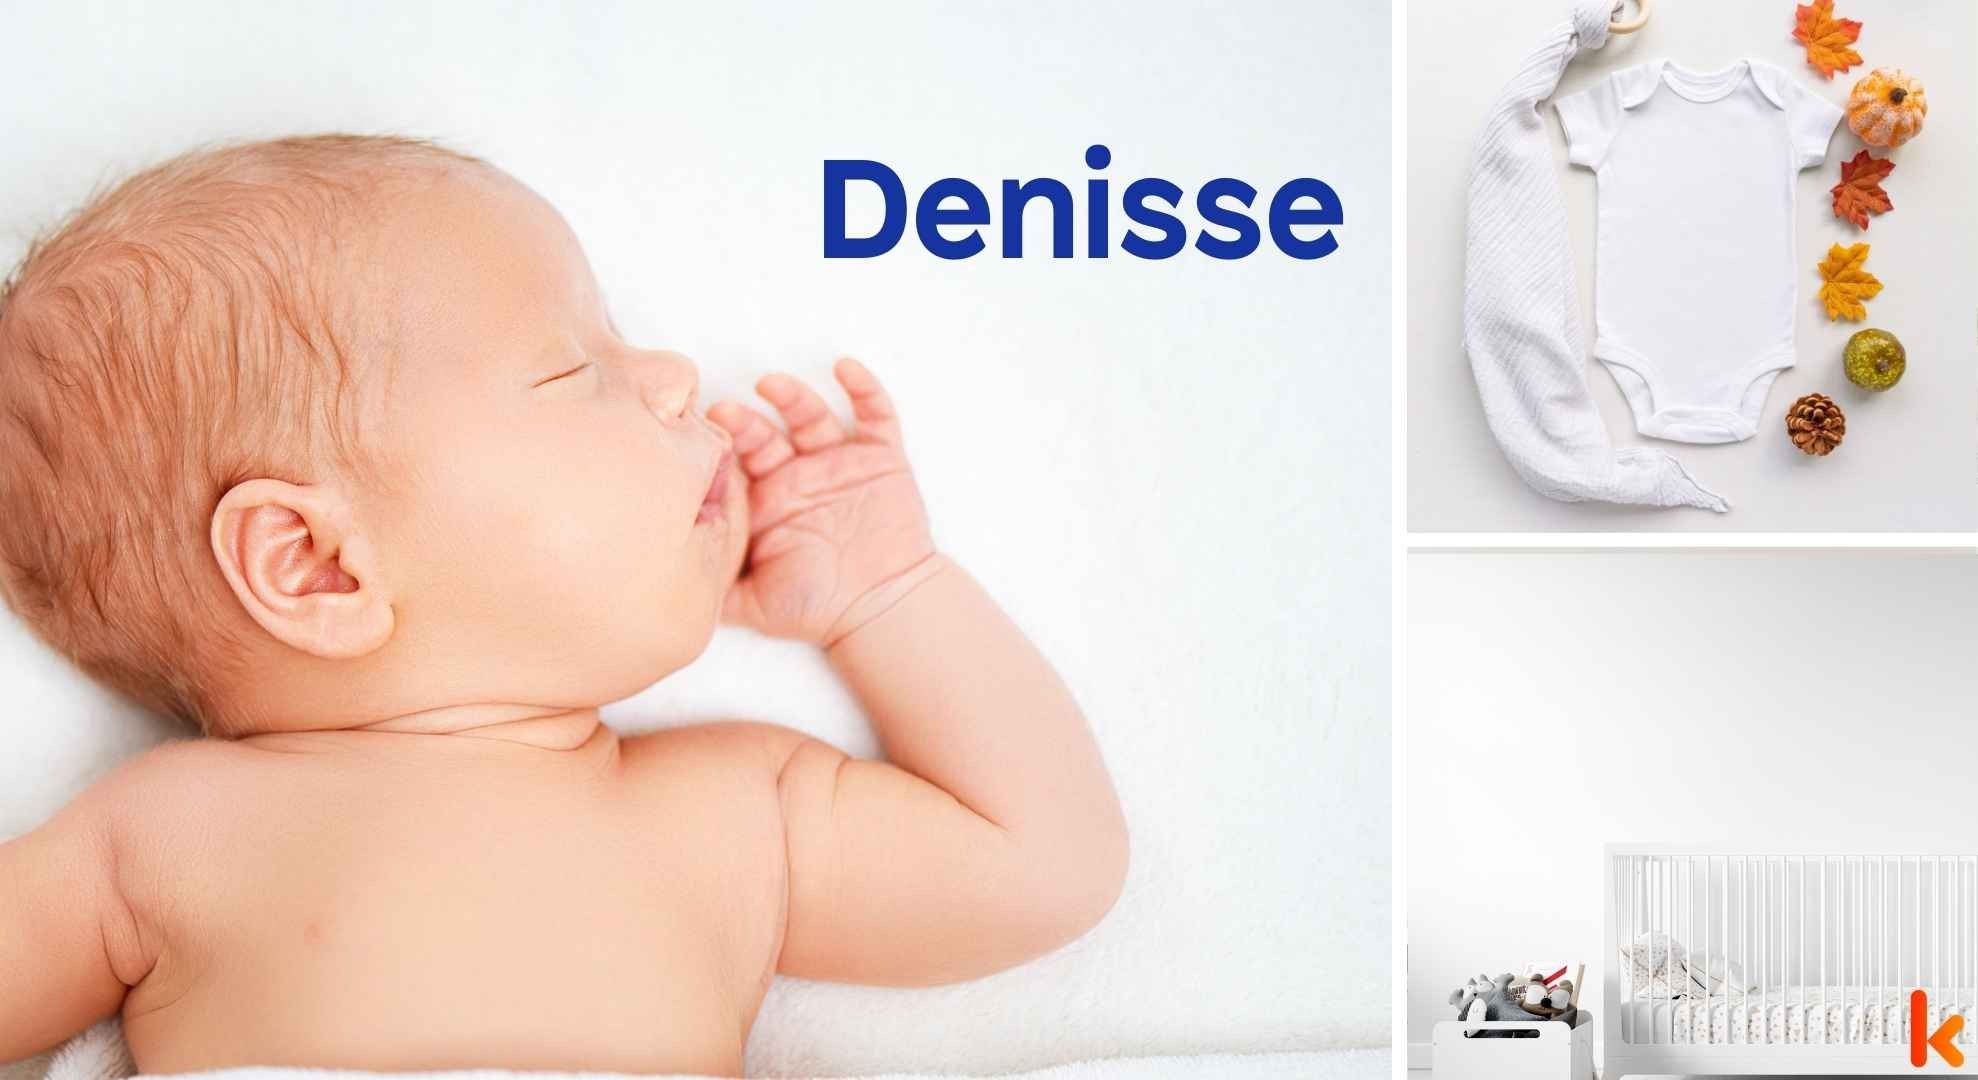 Meaning of the name Denisse